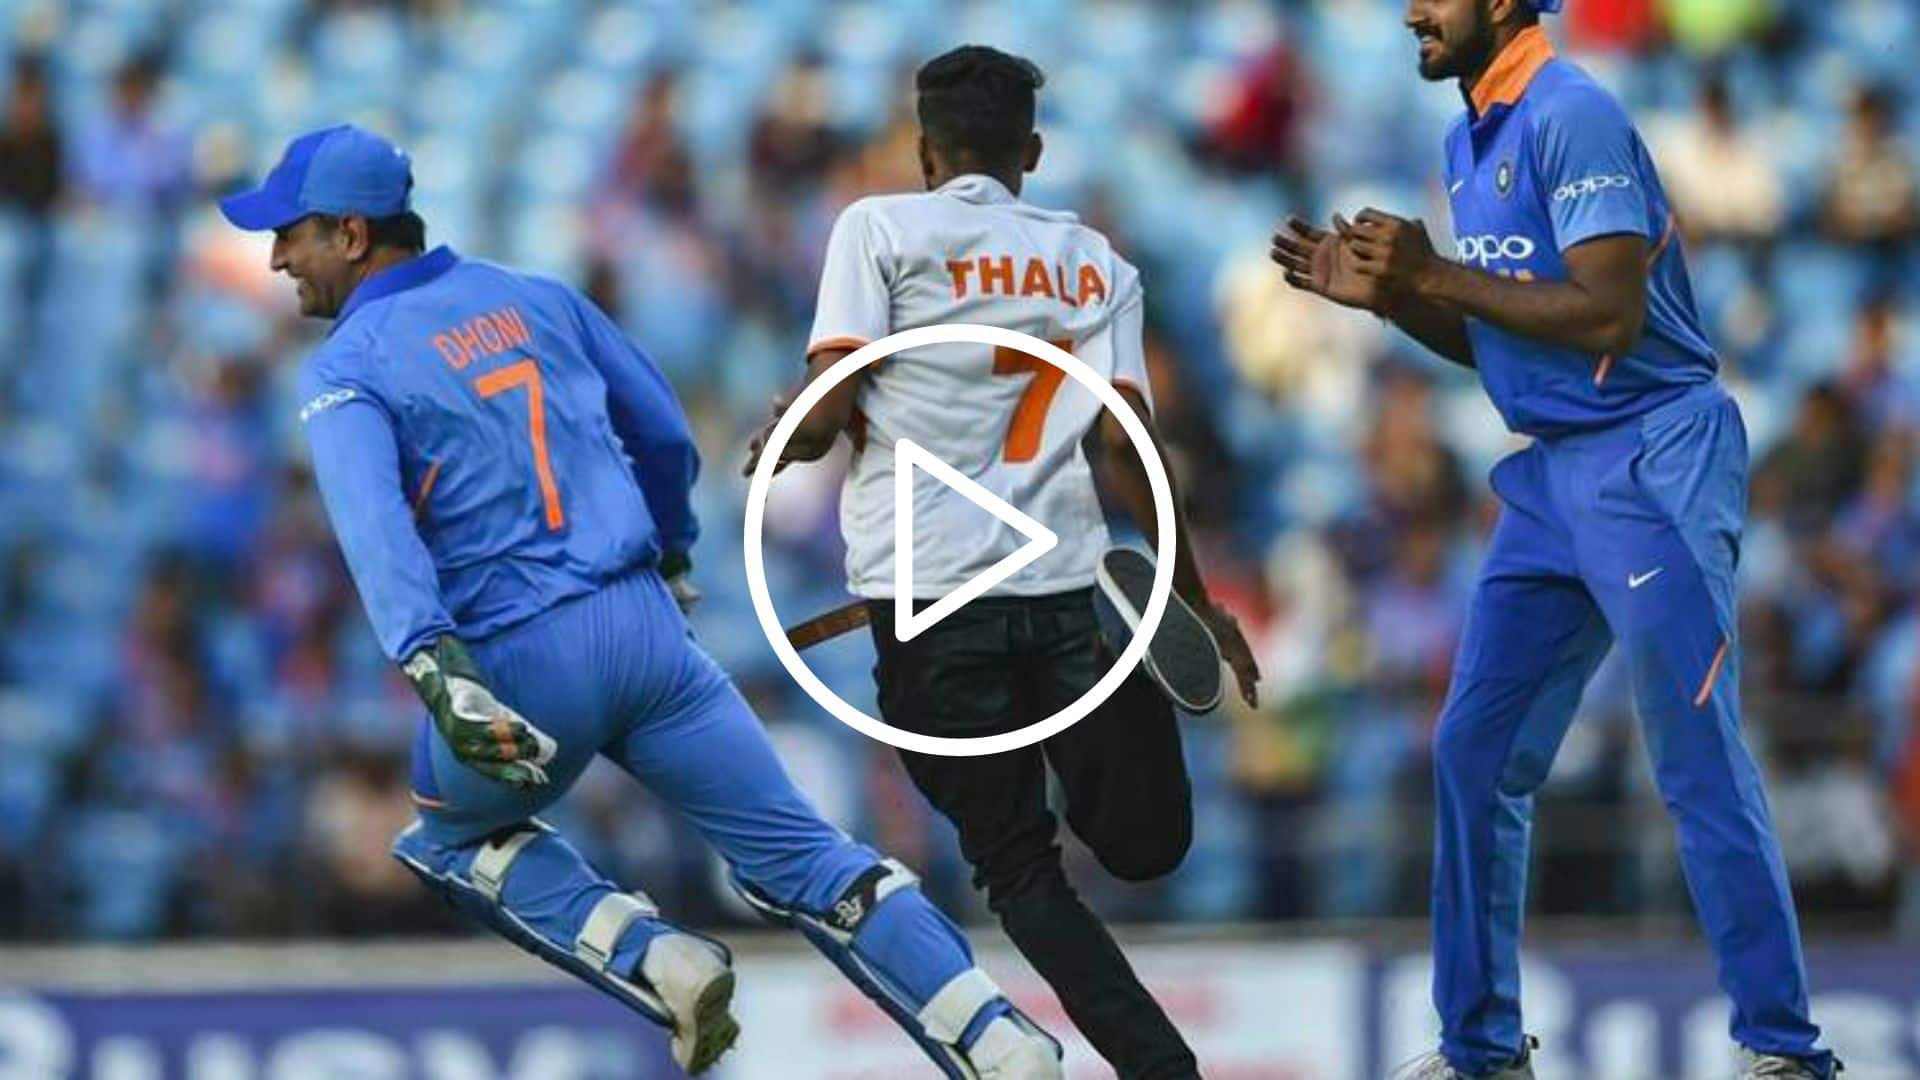 [Watch] MS Dhoni Having Fun With A Pitch Invading Fan During His Team India Days